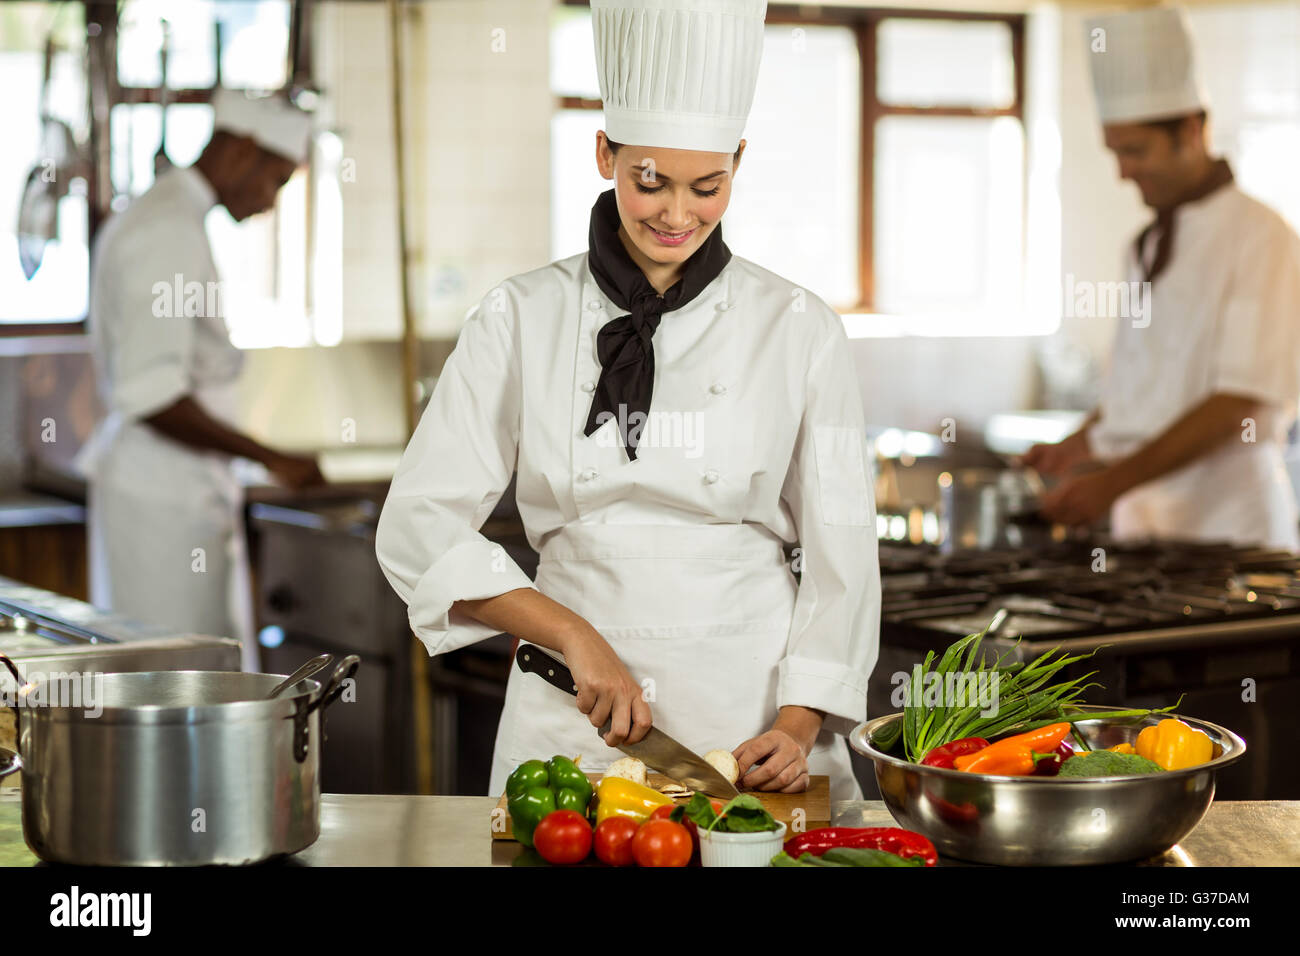 Young female chef cutting vegetables Stock Photo